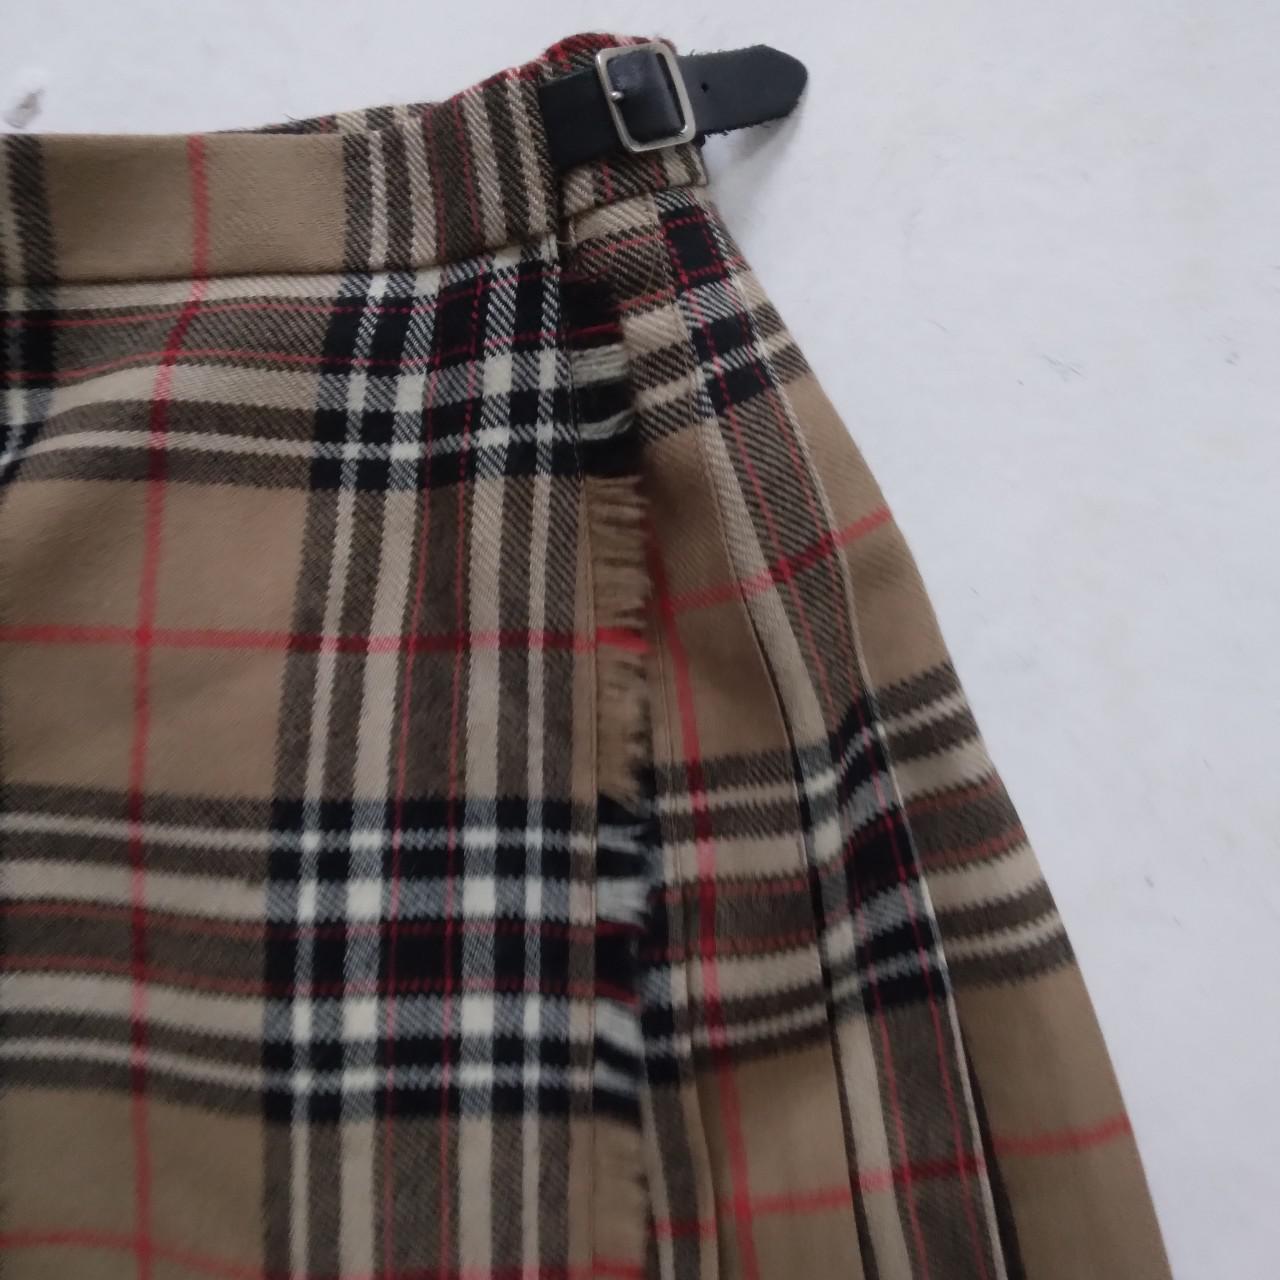 Product Image 2 - Vintage Chequered Skirt in kitchen